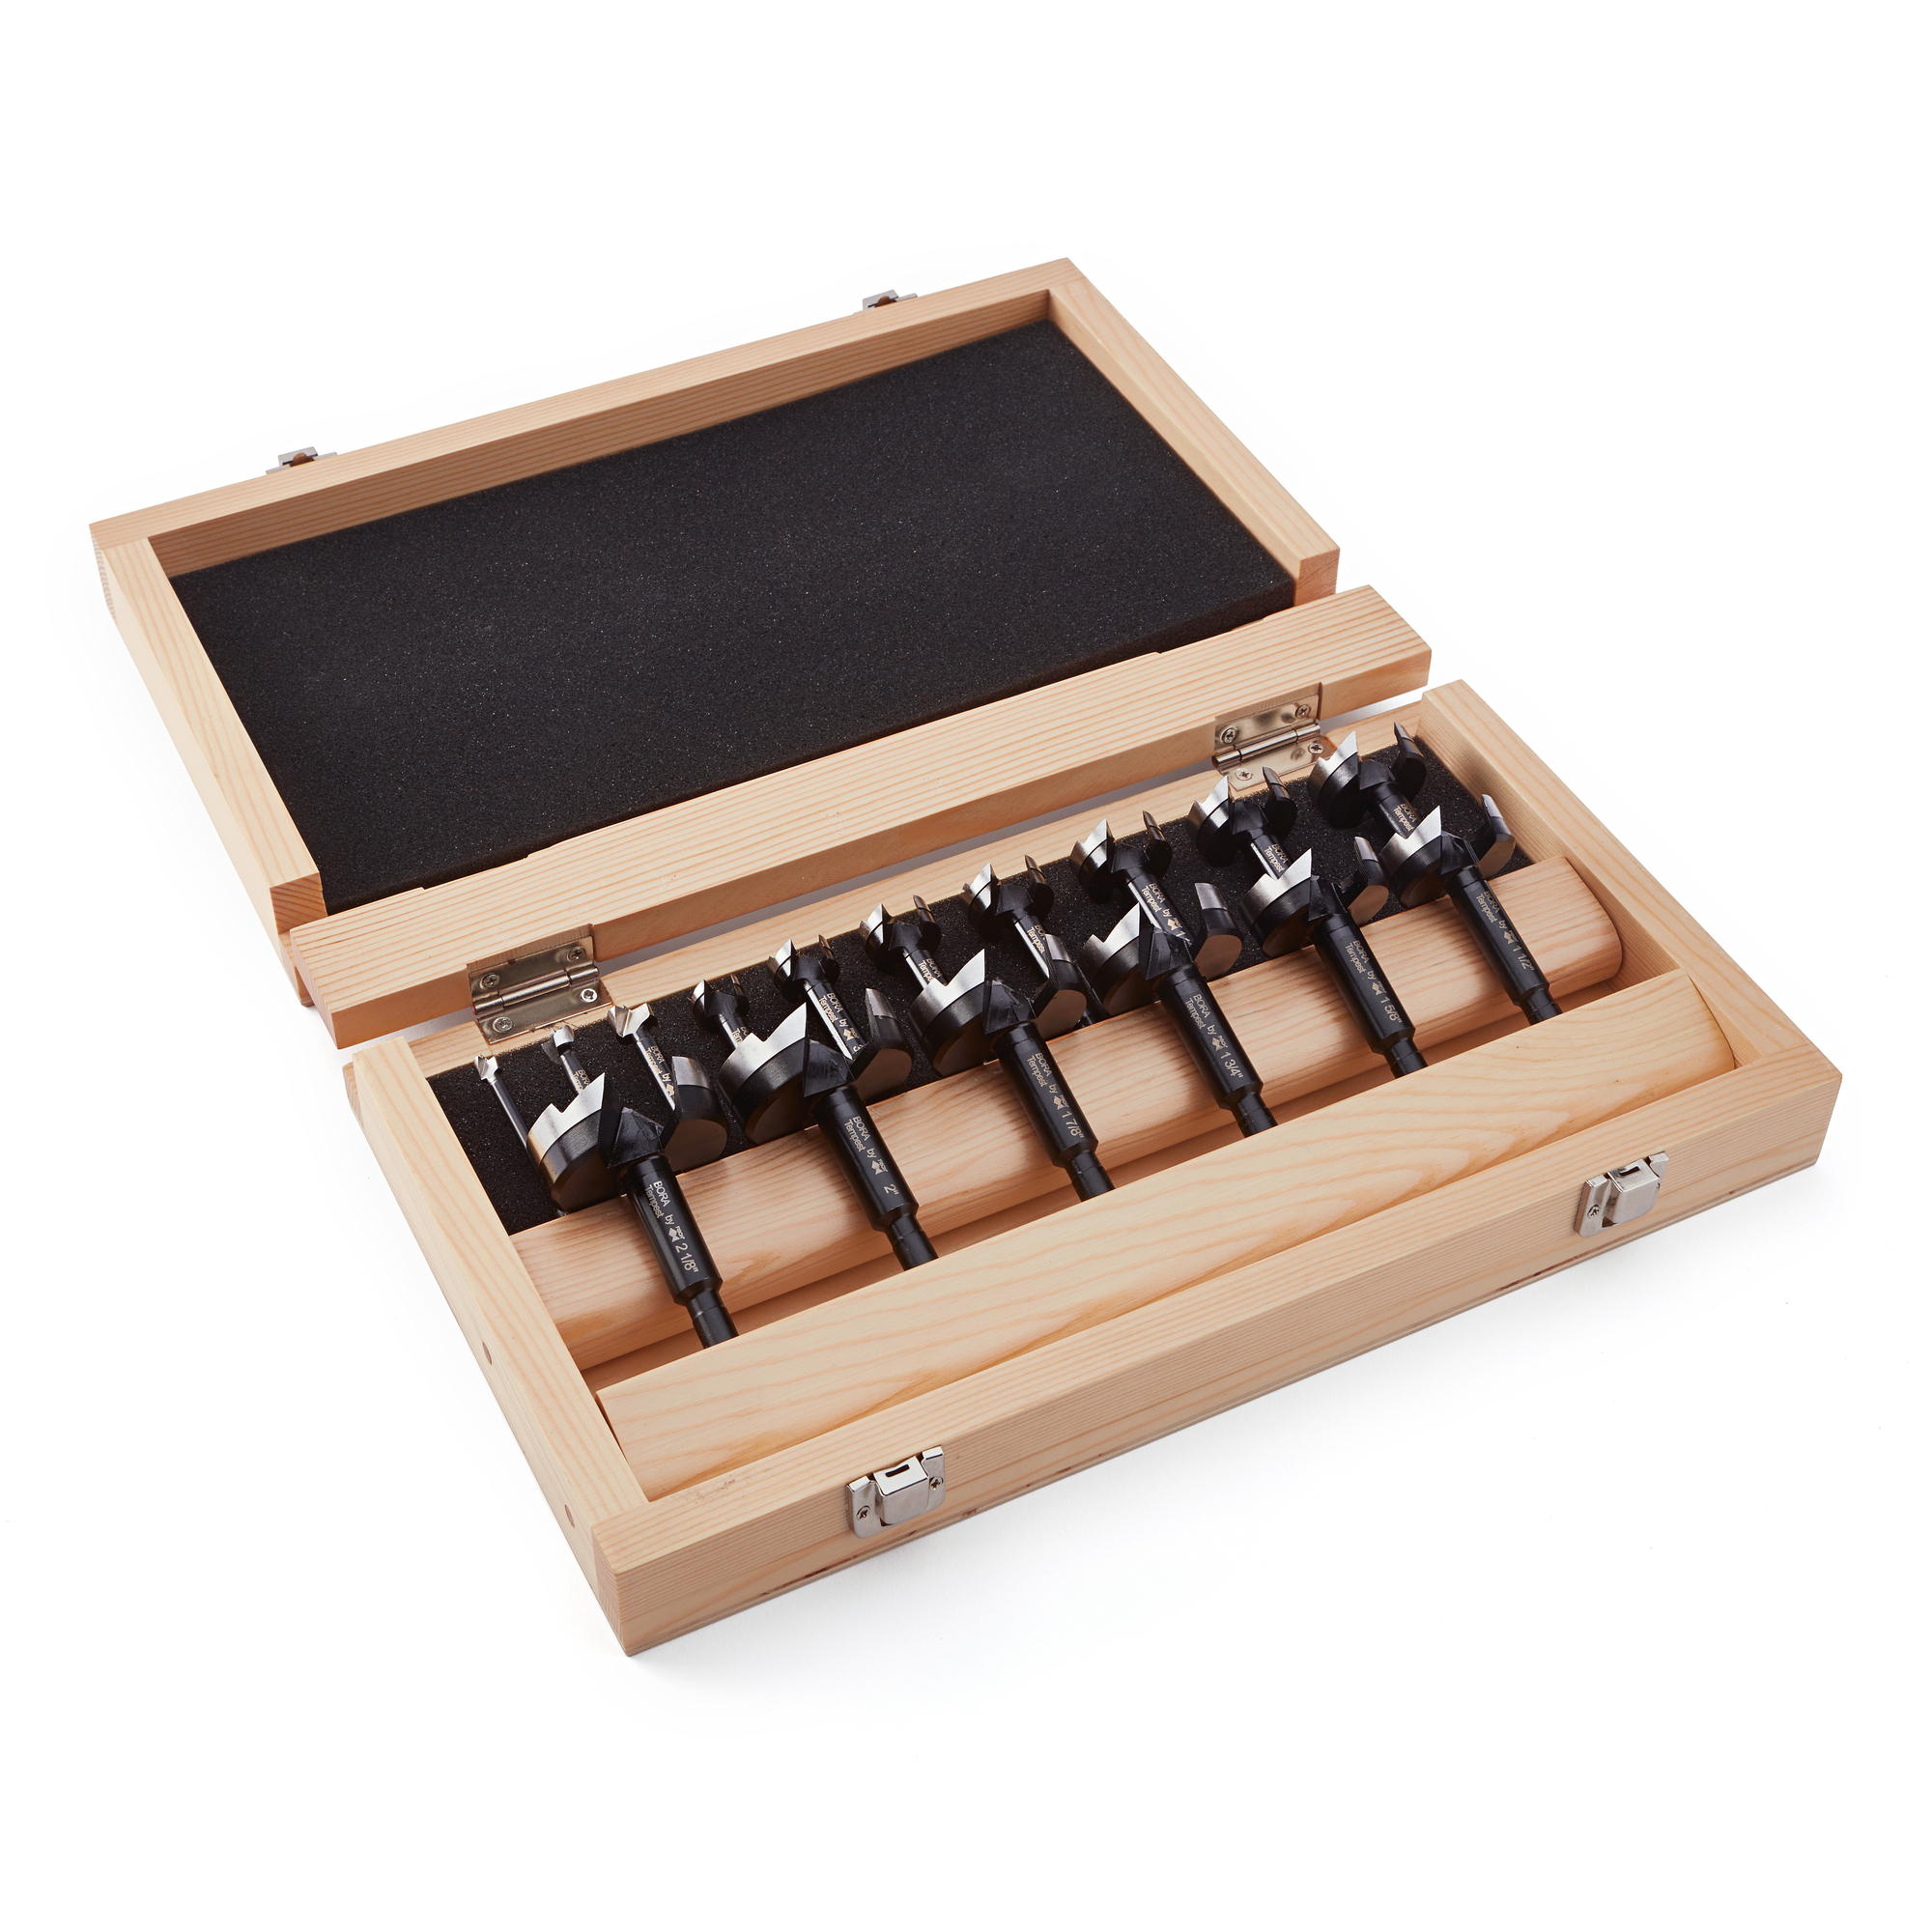 BORA, Tempest Forstner Bit: 16 Pc Set in Wood Box, Included (qty.) 1 Model BFB-009881